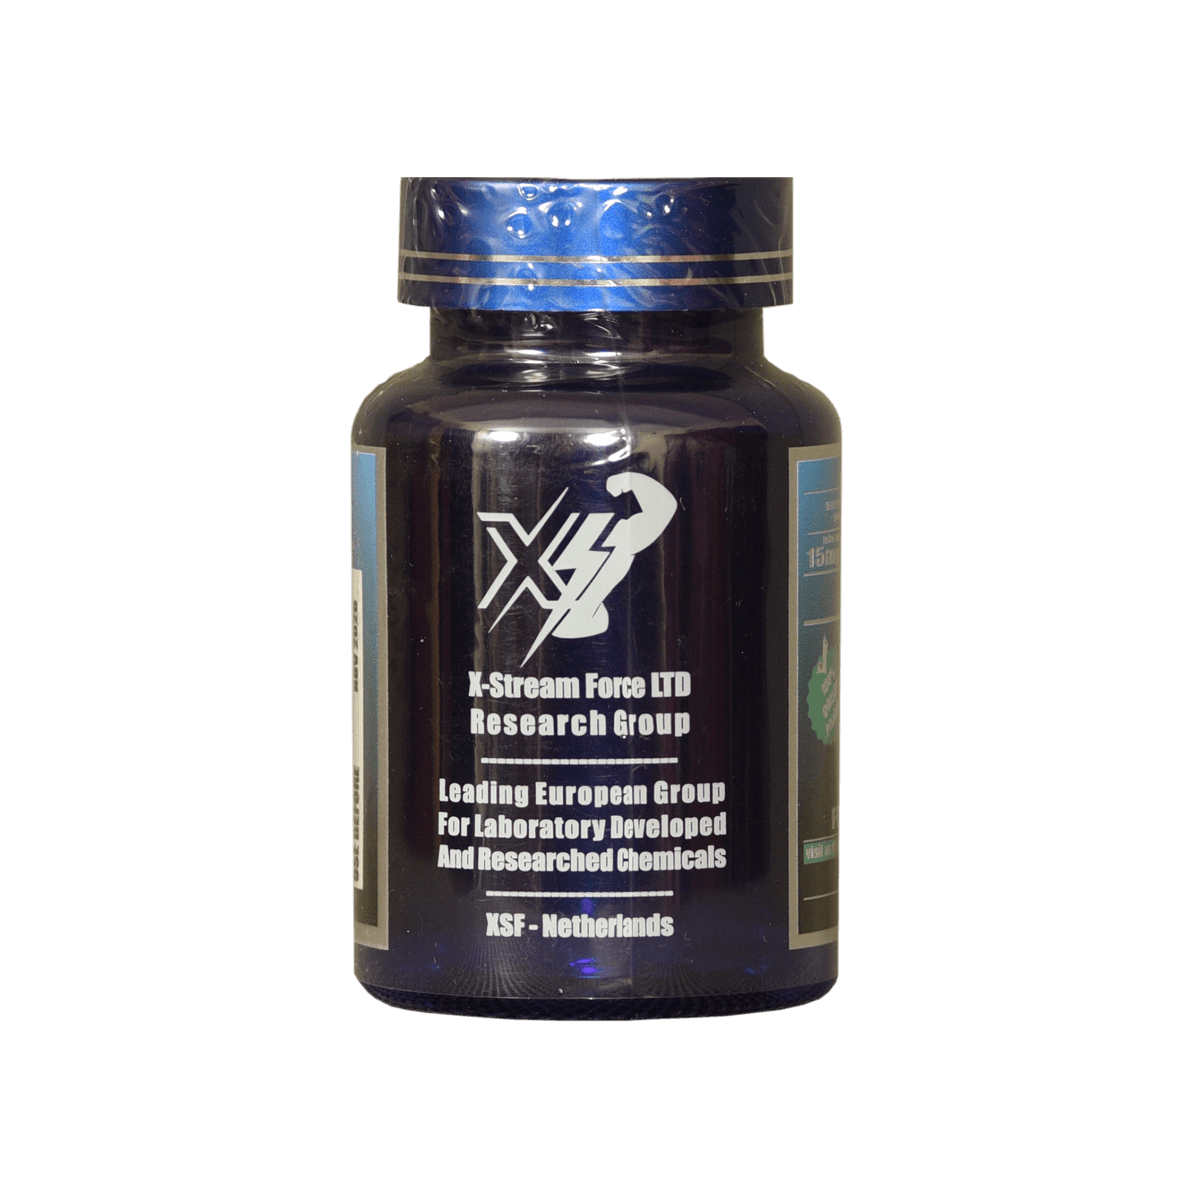 andarine-s4-capsules-100-15mg-muscle shop-xstreamforce-for cardio-strength-fat cleaner-hard and dry✦s4sarms✦ fitness supplements | XSF Store